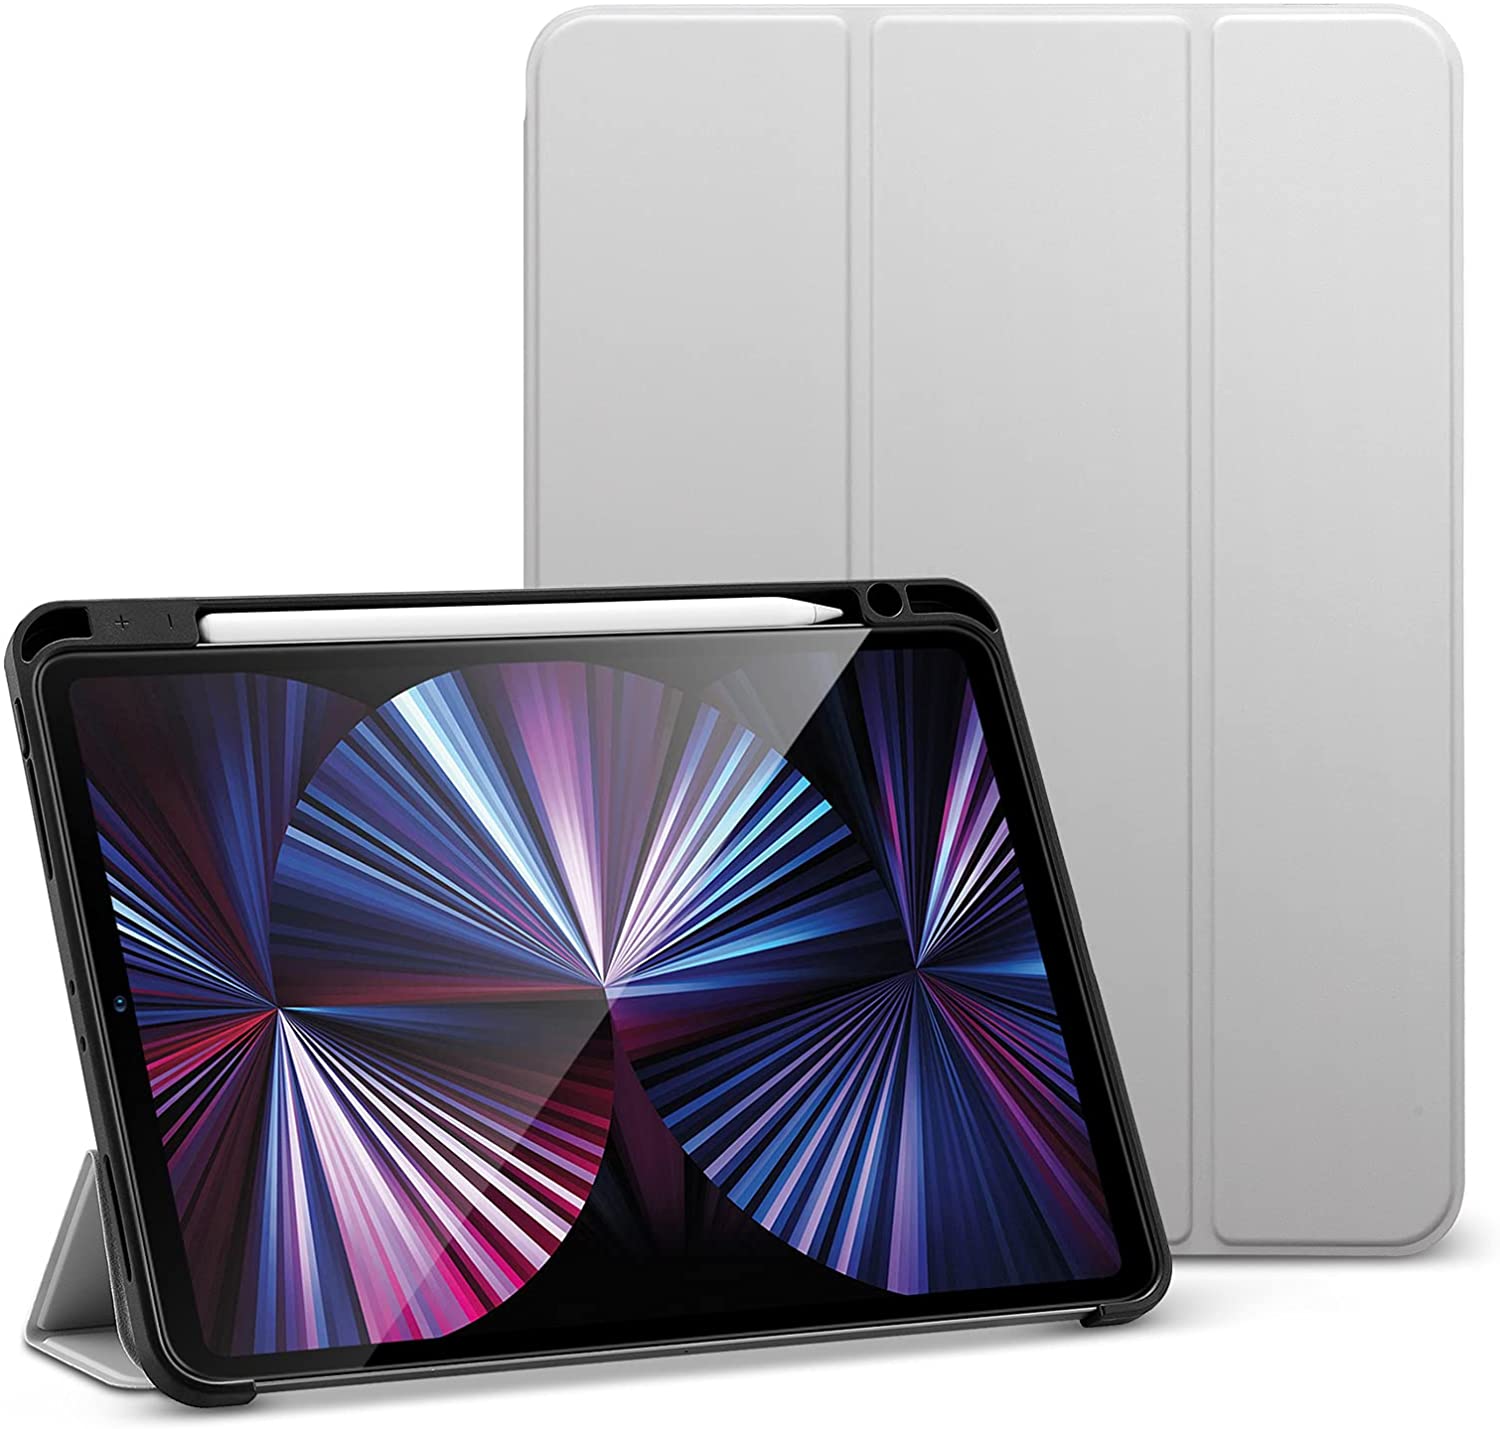 ESR Various Cases for iPad Air 5/4, iPad Pro 11/12.9 & iPad 9/8/7/Mini 6 on Sale from $8.79 + Free Shipping w/ Prime or orders $25+